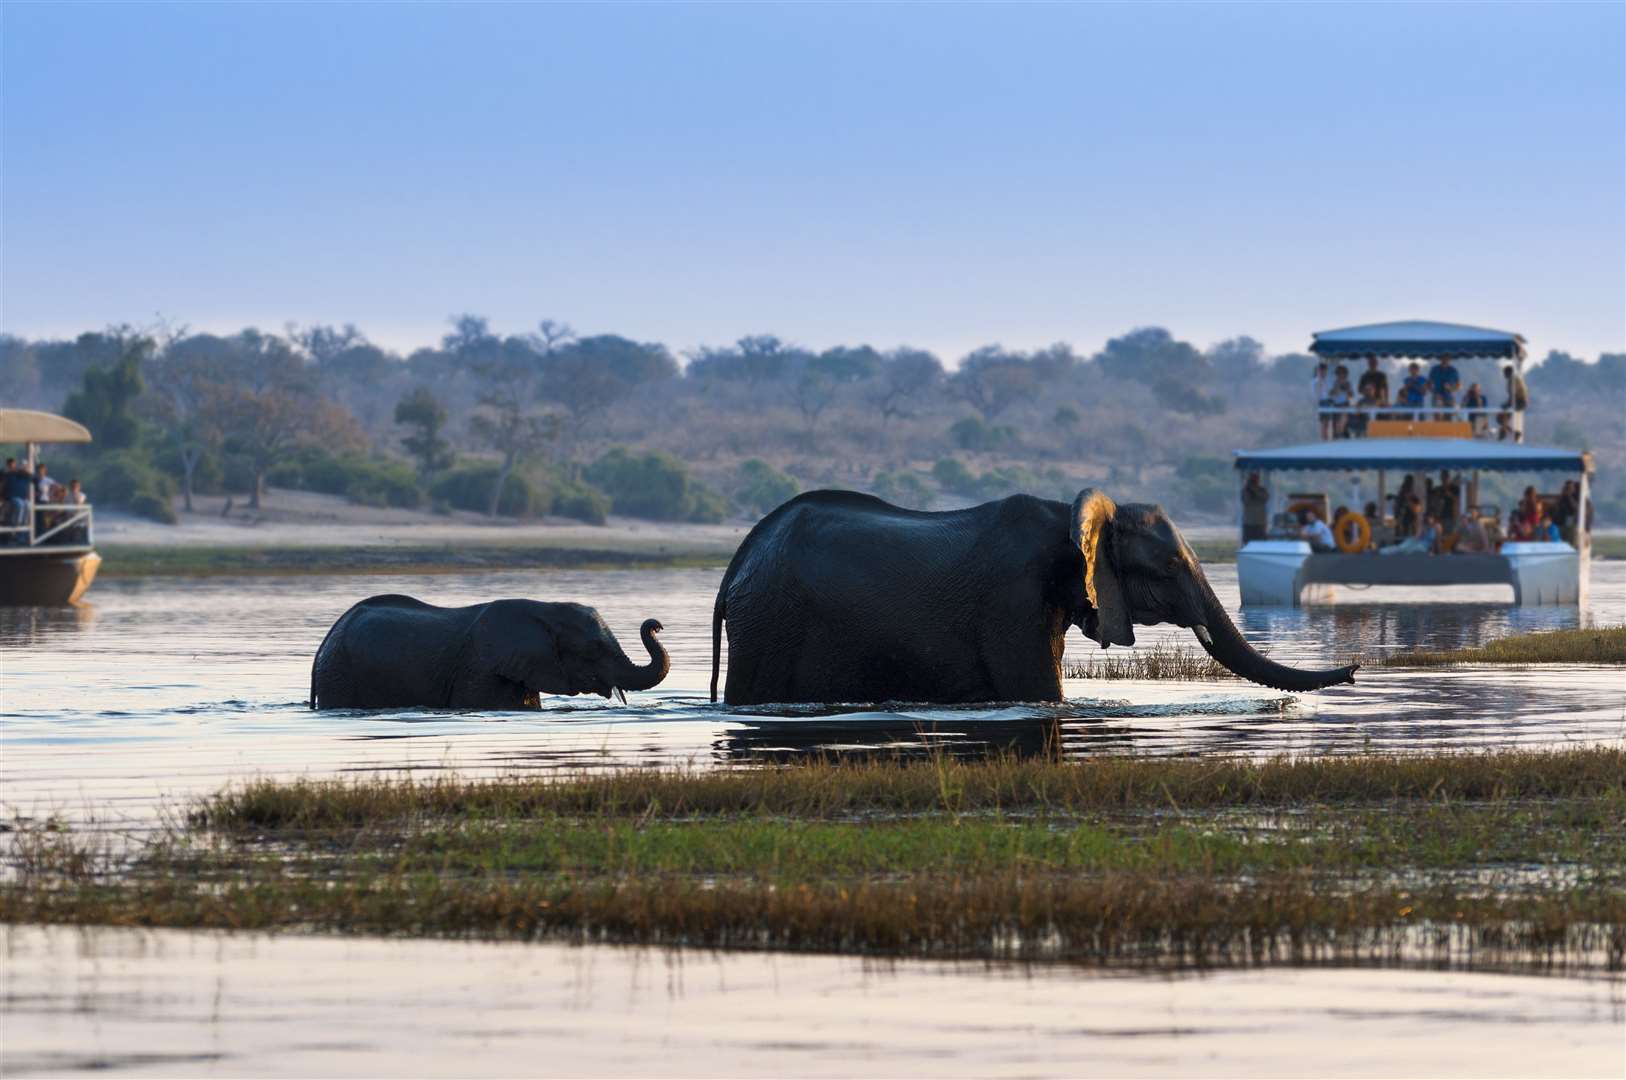 Botswana is one of the fast growing destinations for those seeking a luxury safari